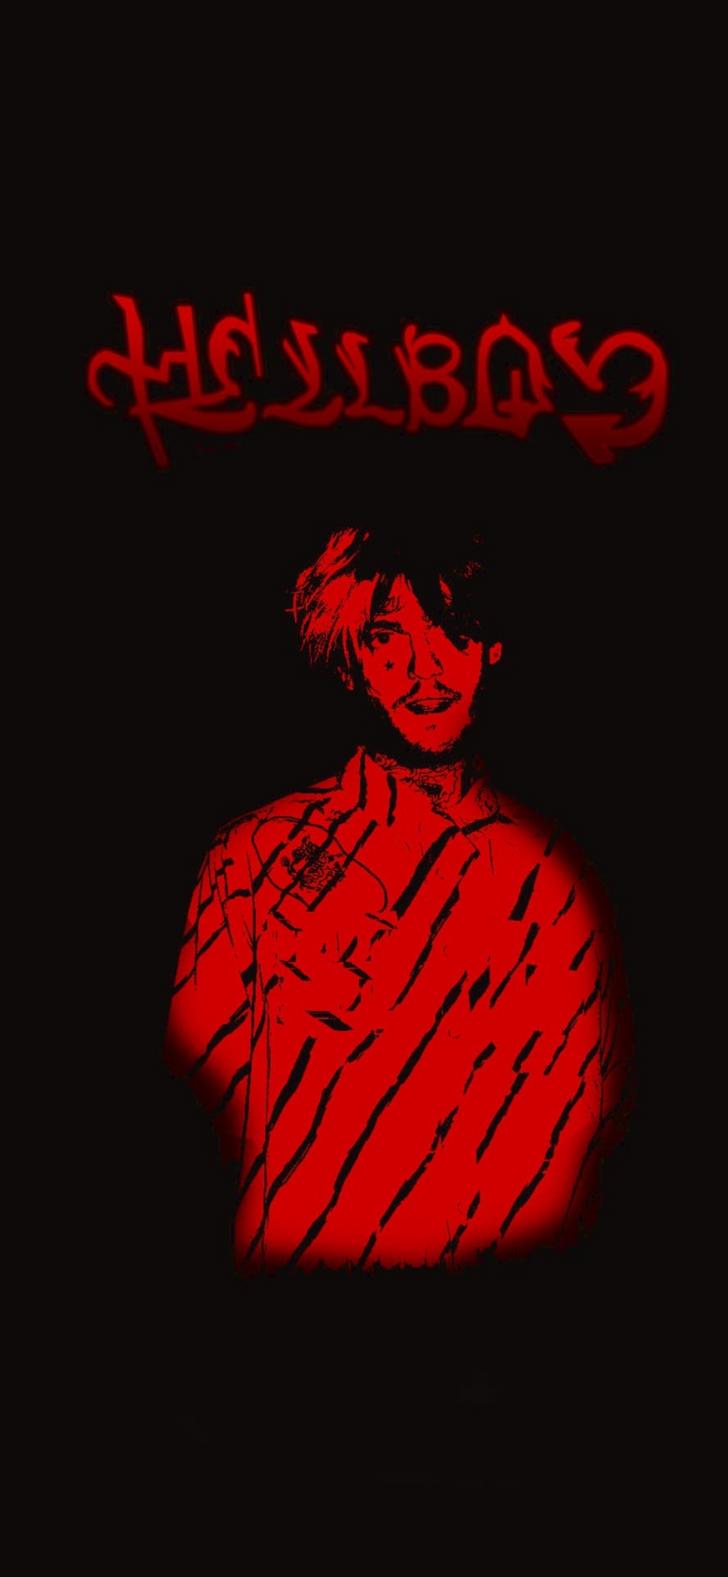 Hellboy phone wallpaper I made a while ago. - Lil Peep